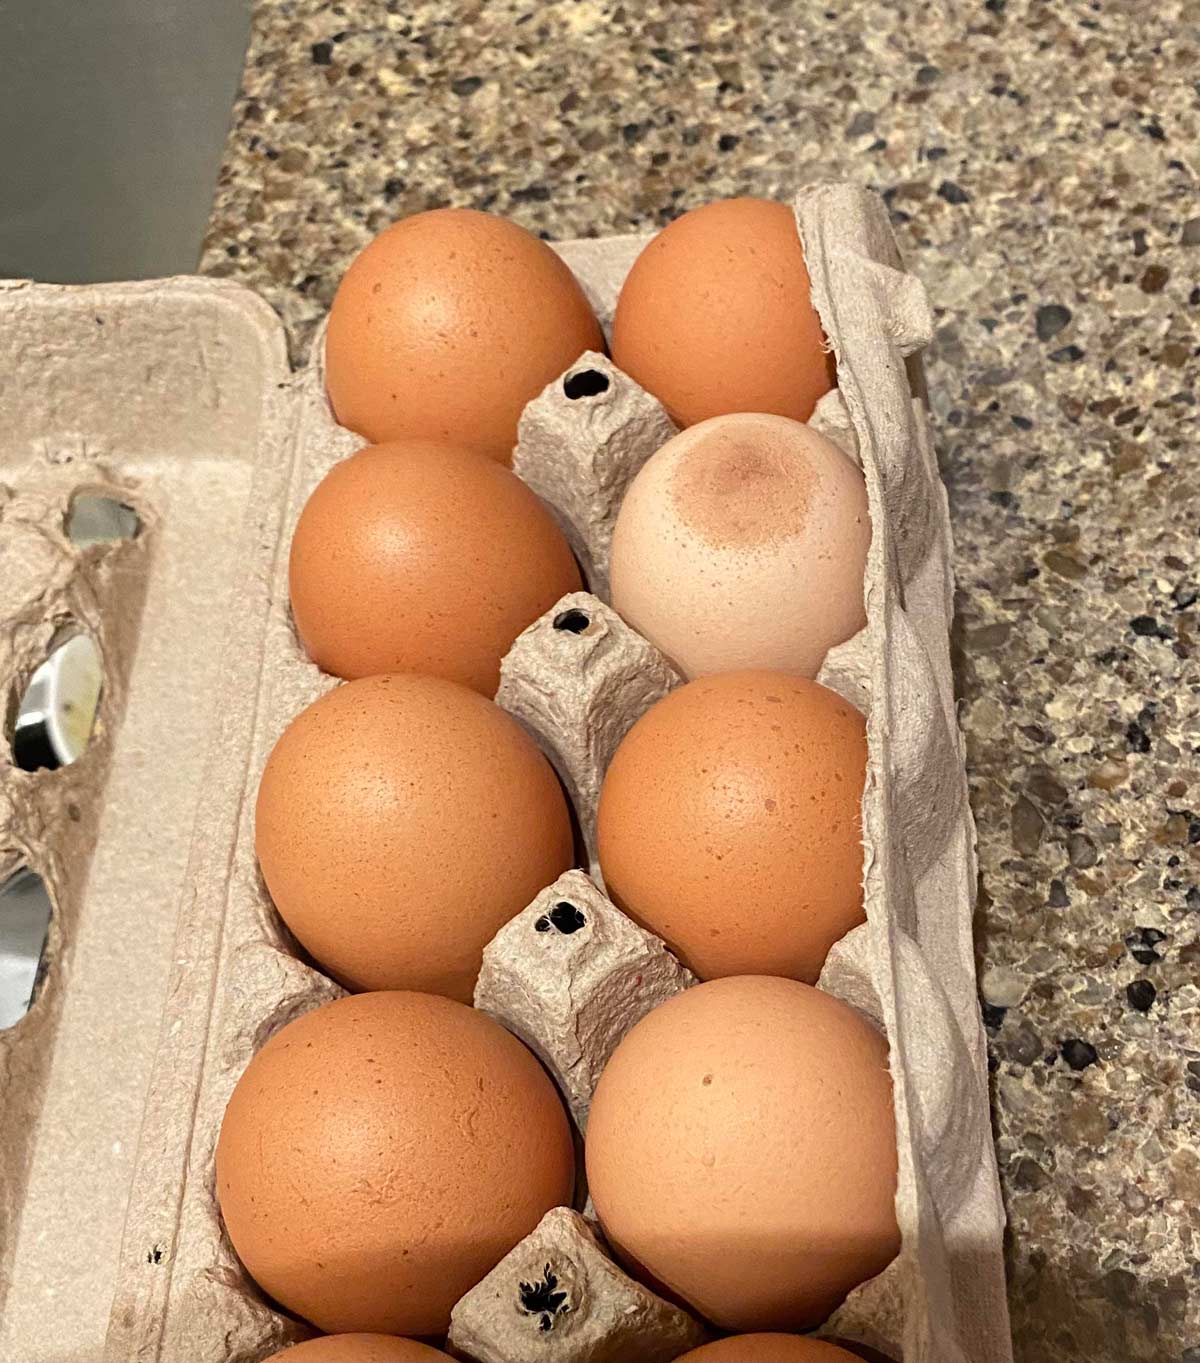 Bought some eggs today and one is a bit different than the rest